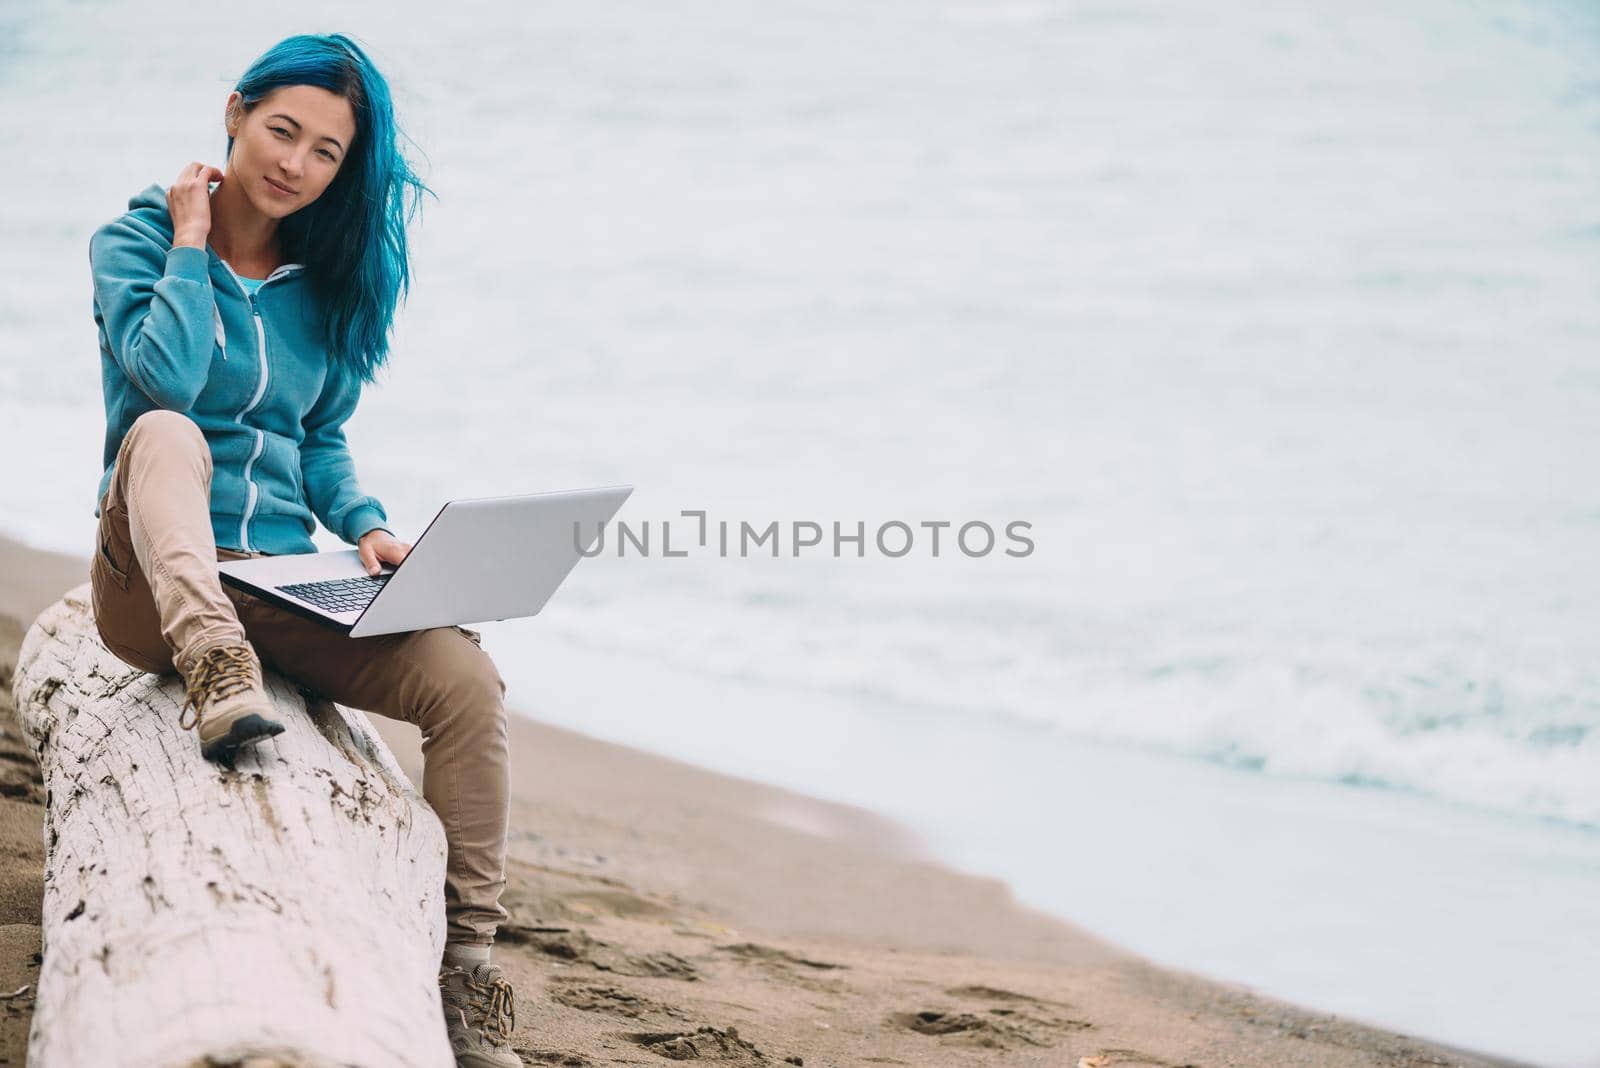 Freelancer young beautiful woman sitting on beach near the sea with laptop and looking at camera. Space for text in right part of the image